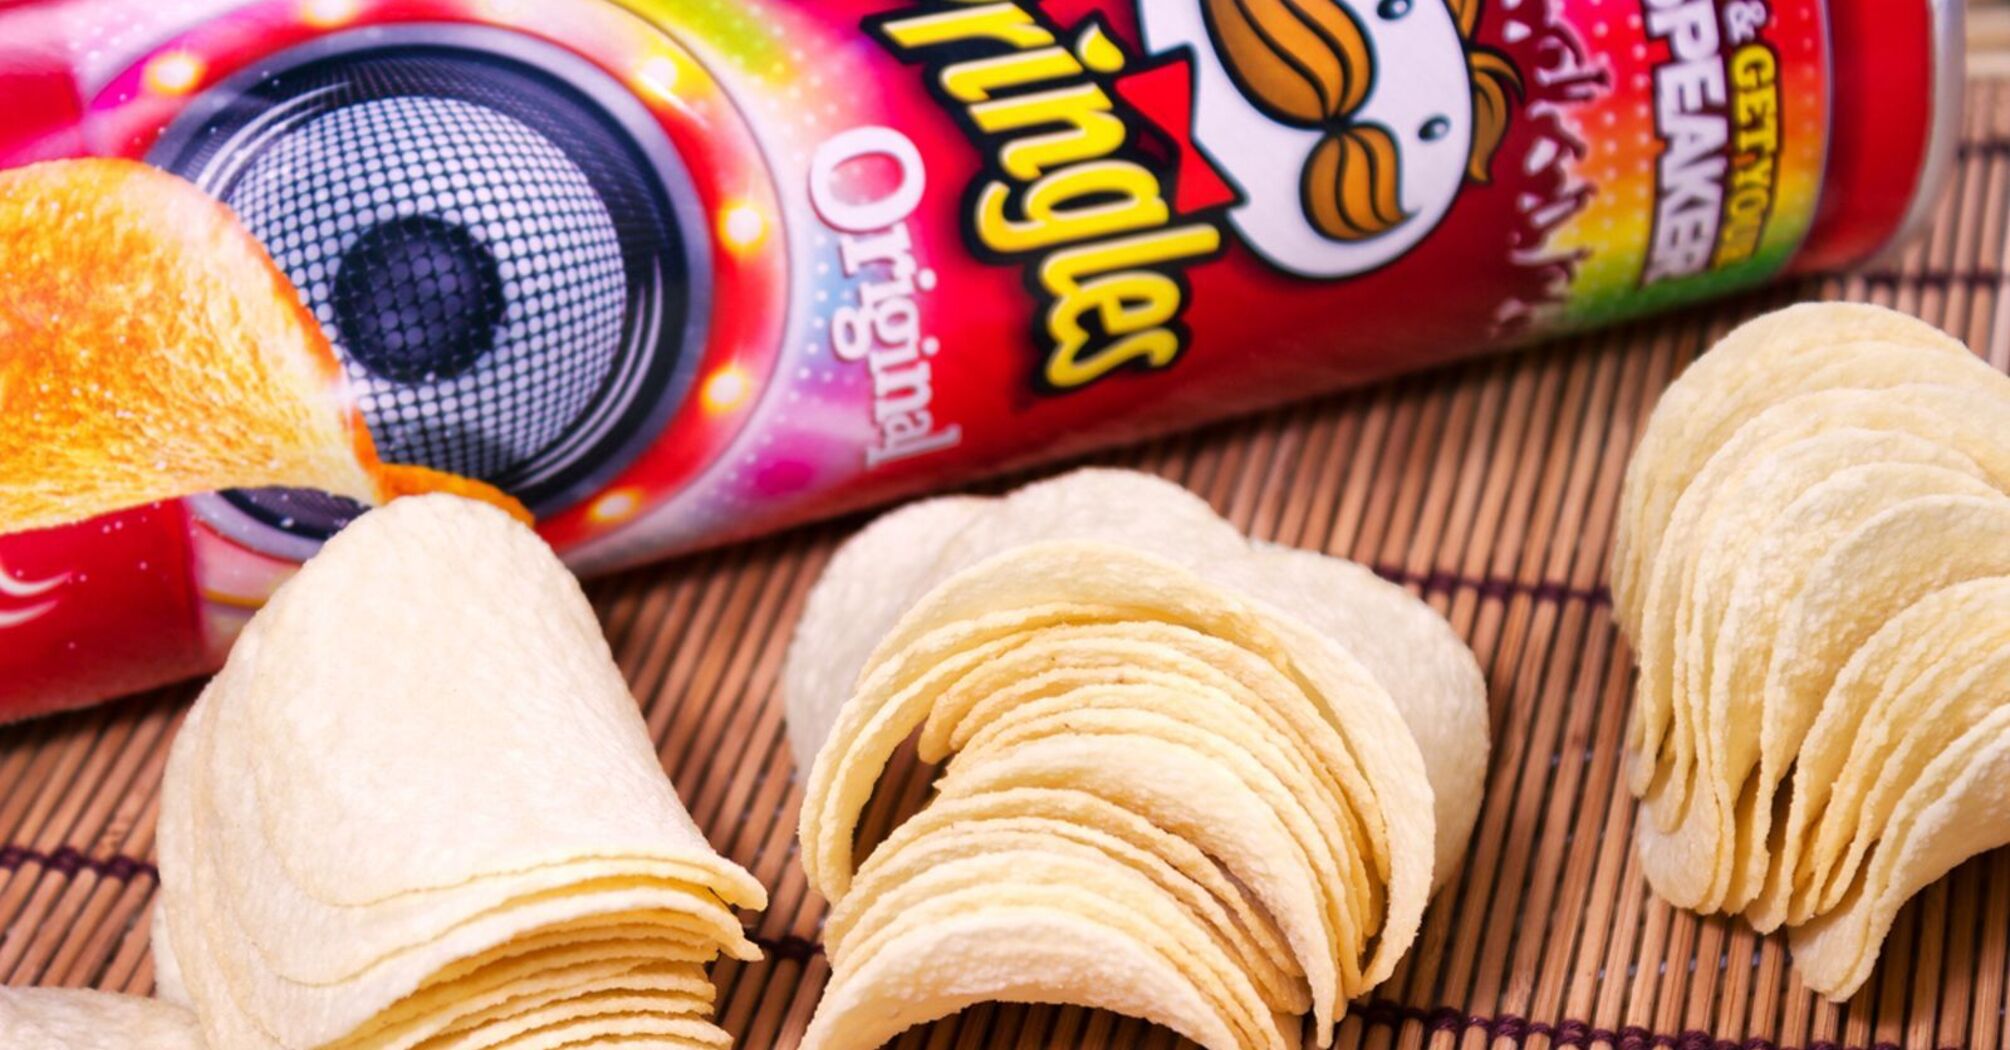 "Once you pop, you can't stop": Pringles thief tells police